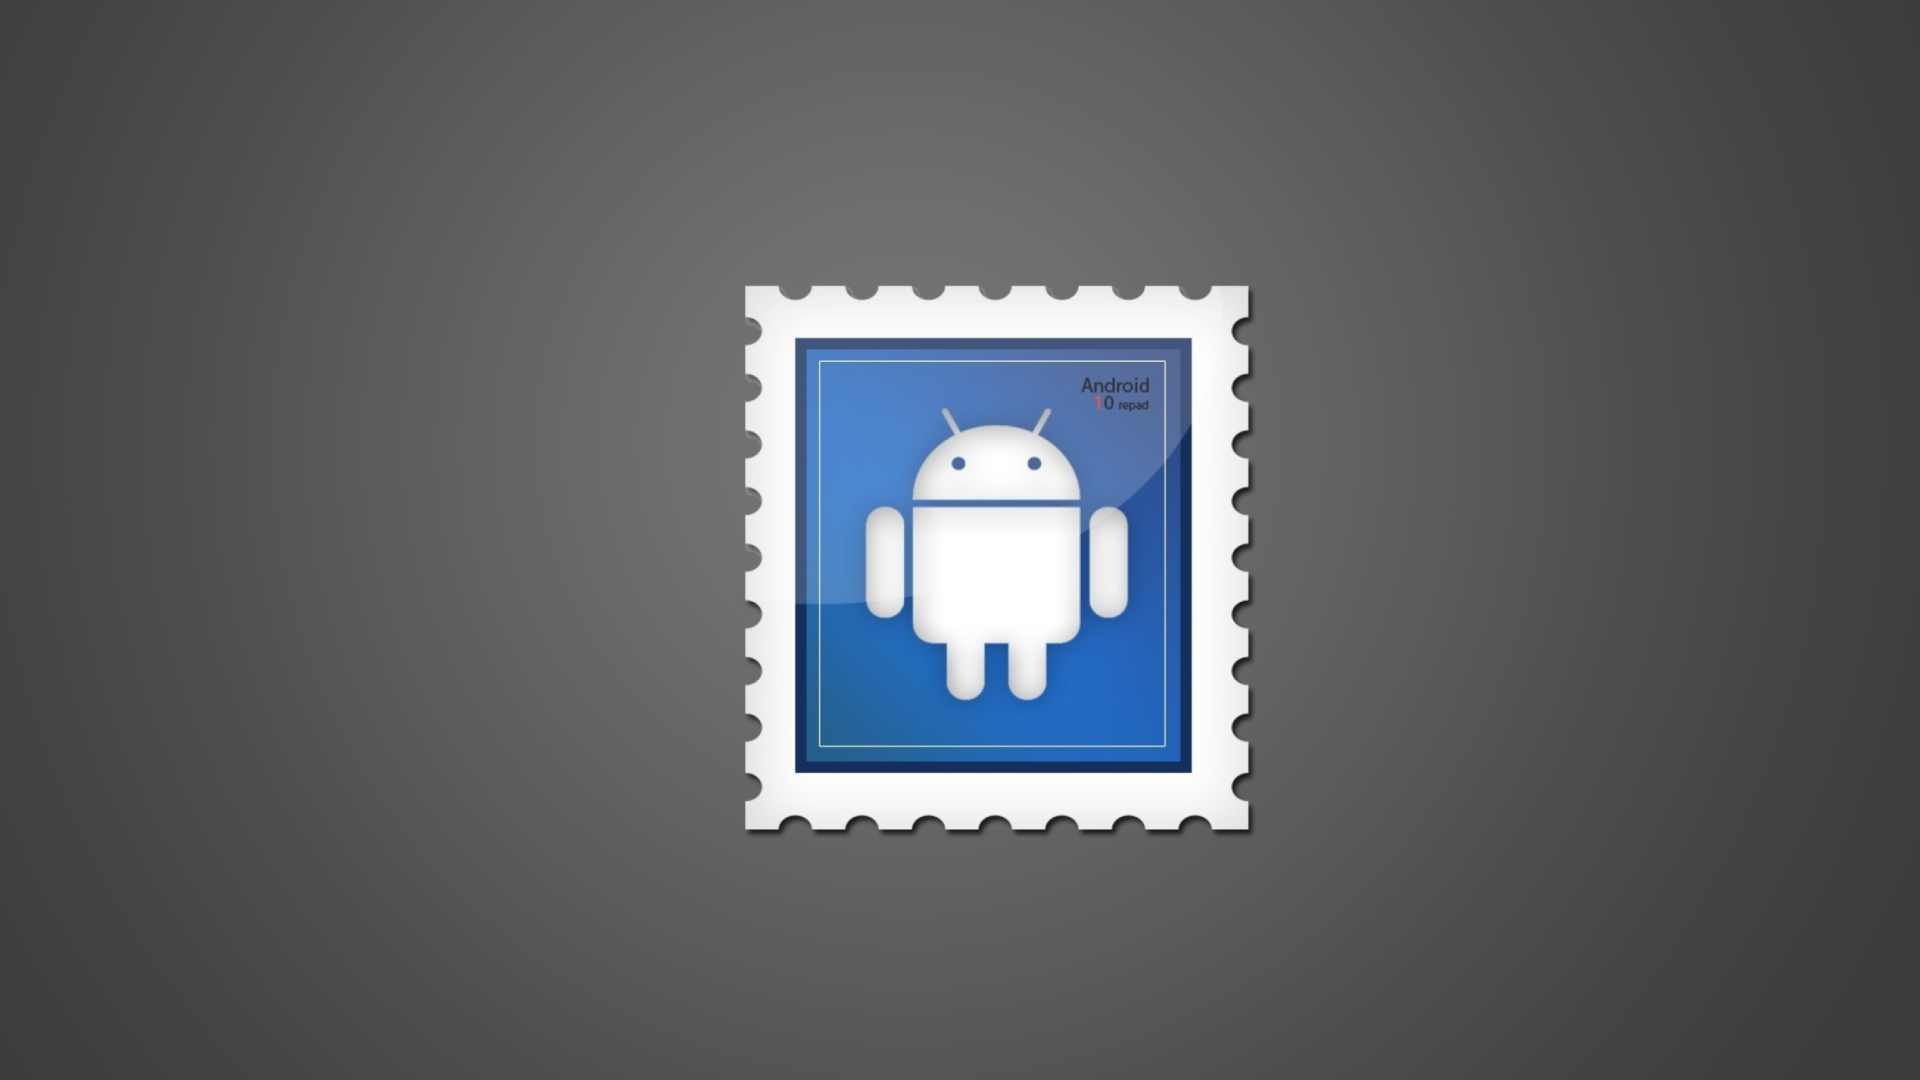 Android Postage Stamp wallpaper 1920x1080